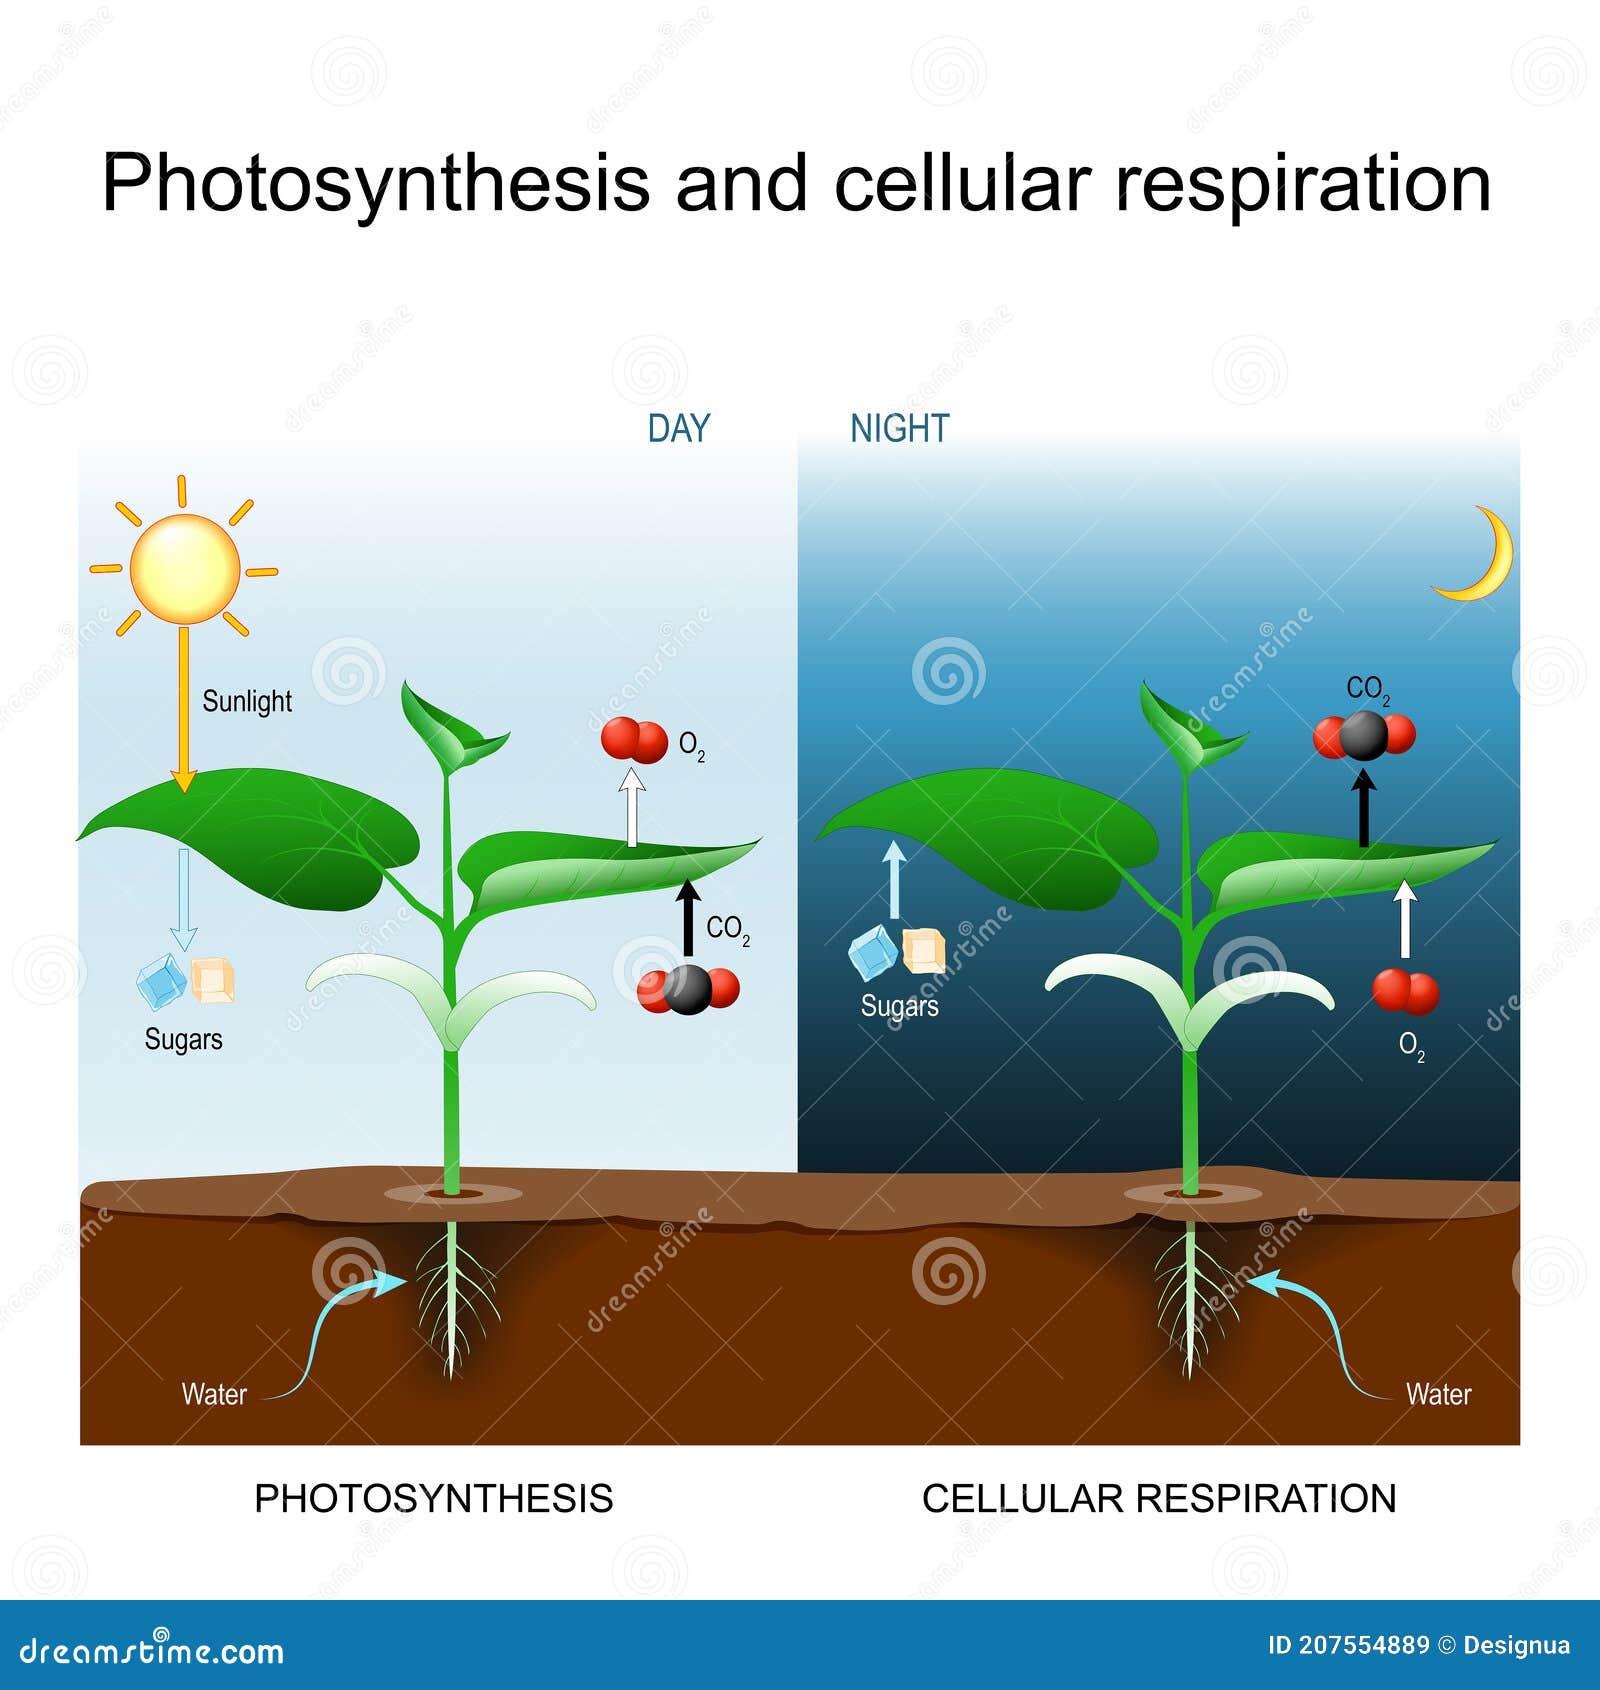 photosynthesis and cellular respiration. comparison day and night for plant